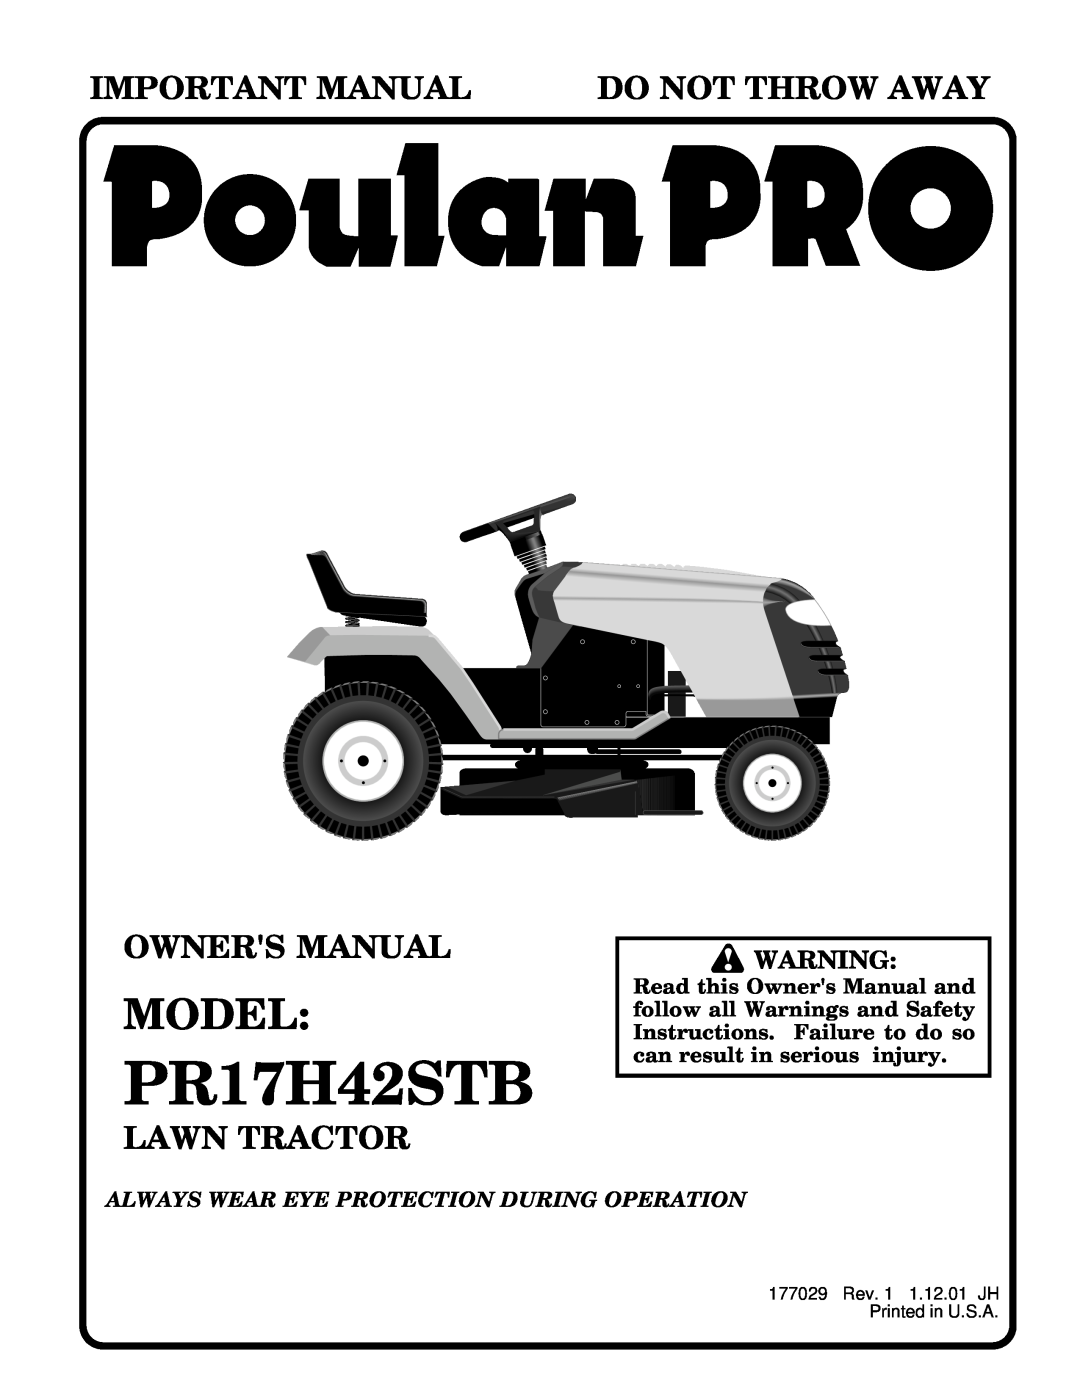 Poulan 177029 owner manual Model, PR17H42STB, Important Manual, Do Not Throw Away, Owners Manual, Lawn Tractor 